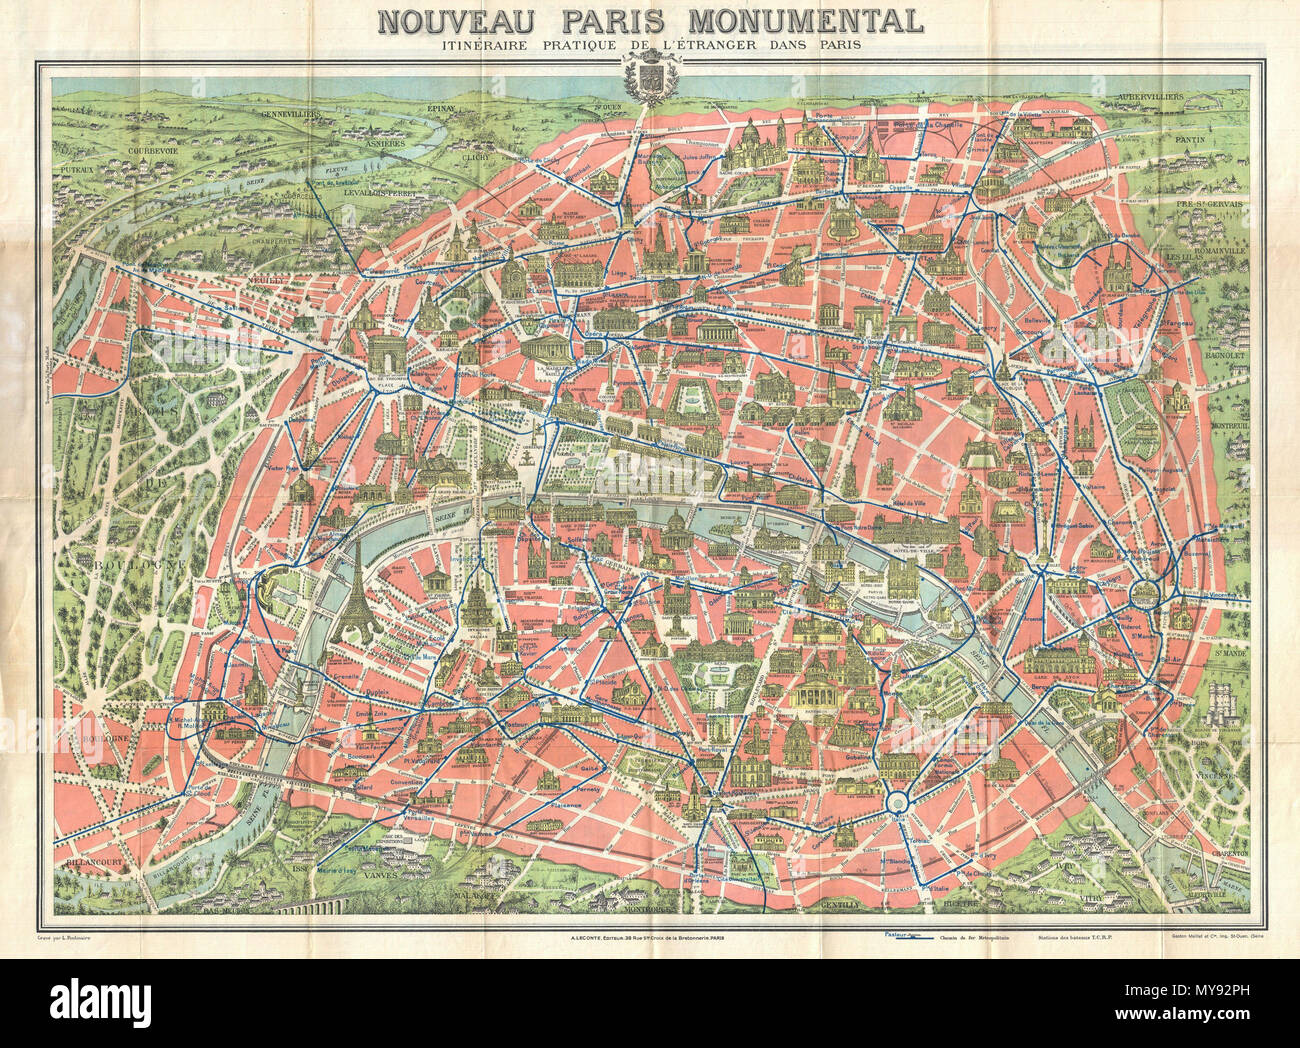 . Nouveau Paris Monumental Inineraire Pratique de L'Etranger Dans Paris.  English: A highly decorative map of Paris dating to c. 1910. Covers the historic center of Paris as well as some of the surrounding countryside - in particular the Bois de Boulogne. Designed with the tourist in mind, this map shows all major monuments and historic attractions, including the Eiffel Tower, in profile. Train and tram lines are noted in blue. Folds into original art nouveau style red binder which also contains a short guide to the city in English, French and German. . 1910 (undated) 10 1910 Leconte Monument  Stock Photo